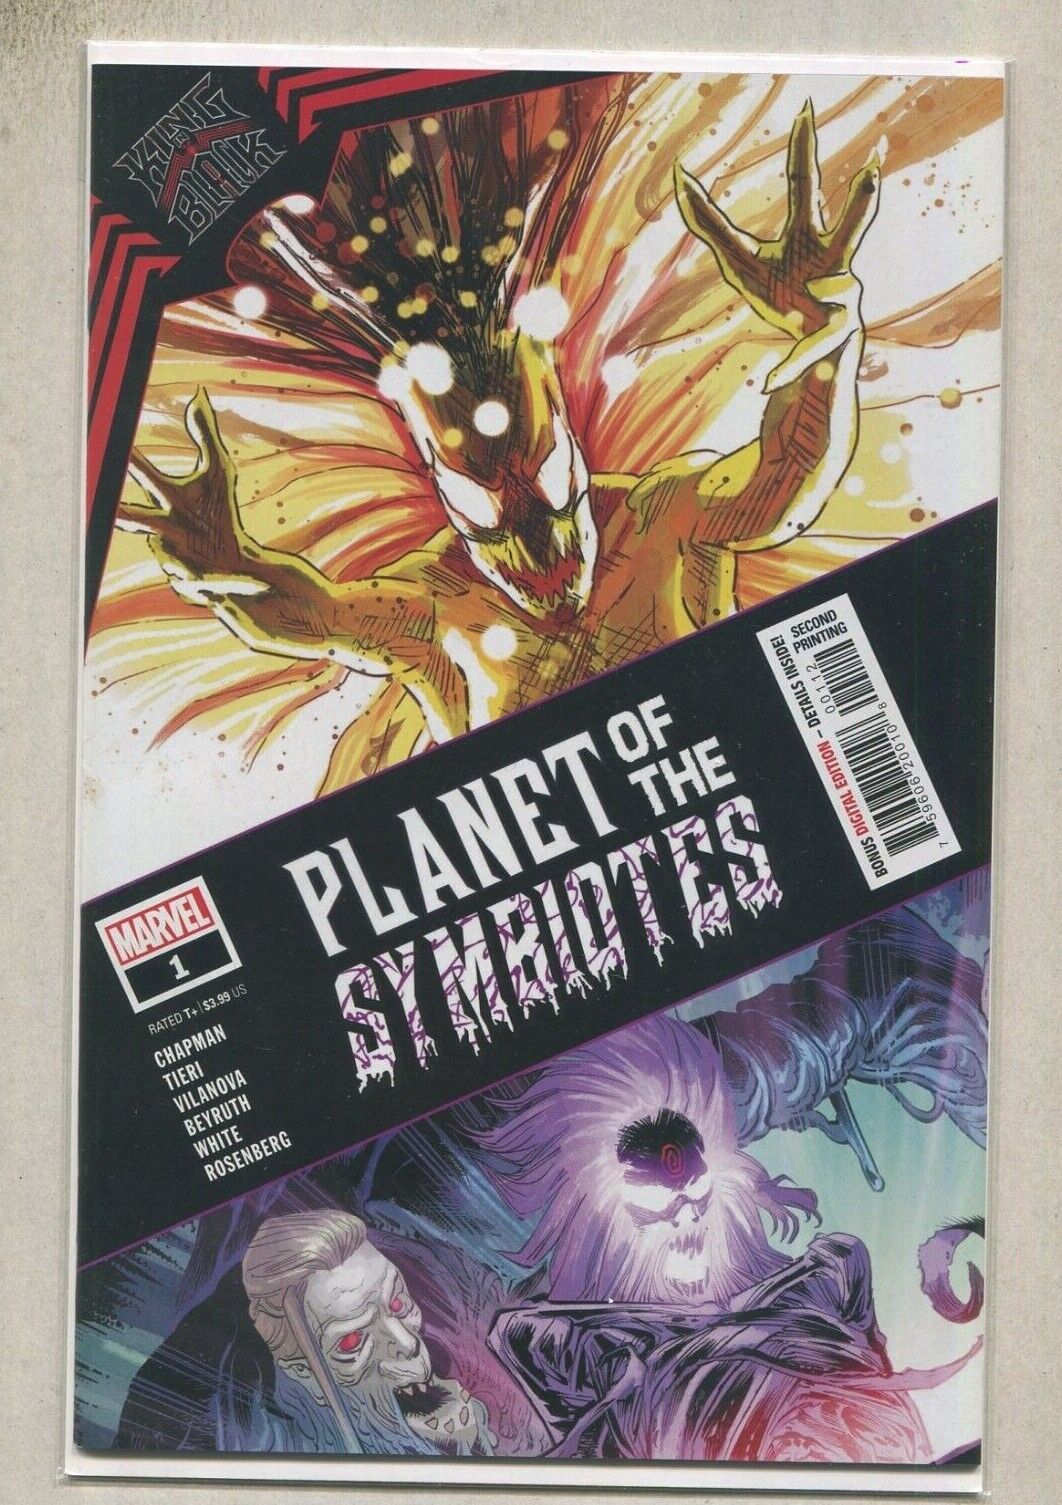 Planet Of The Symbiotes #1 NM Second Printing Marvel Comics CBX2E